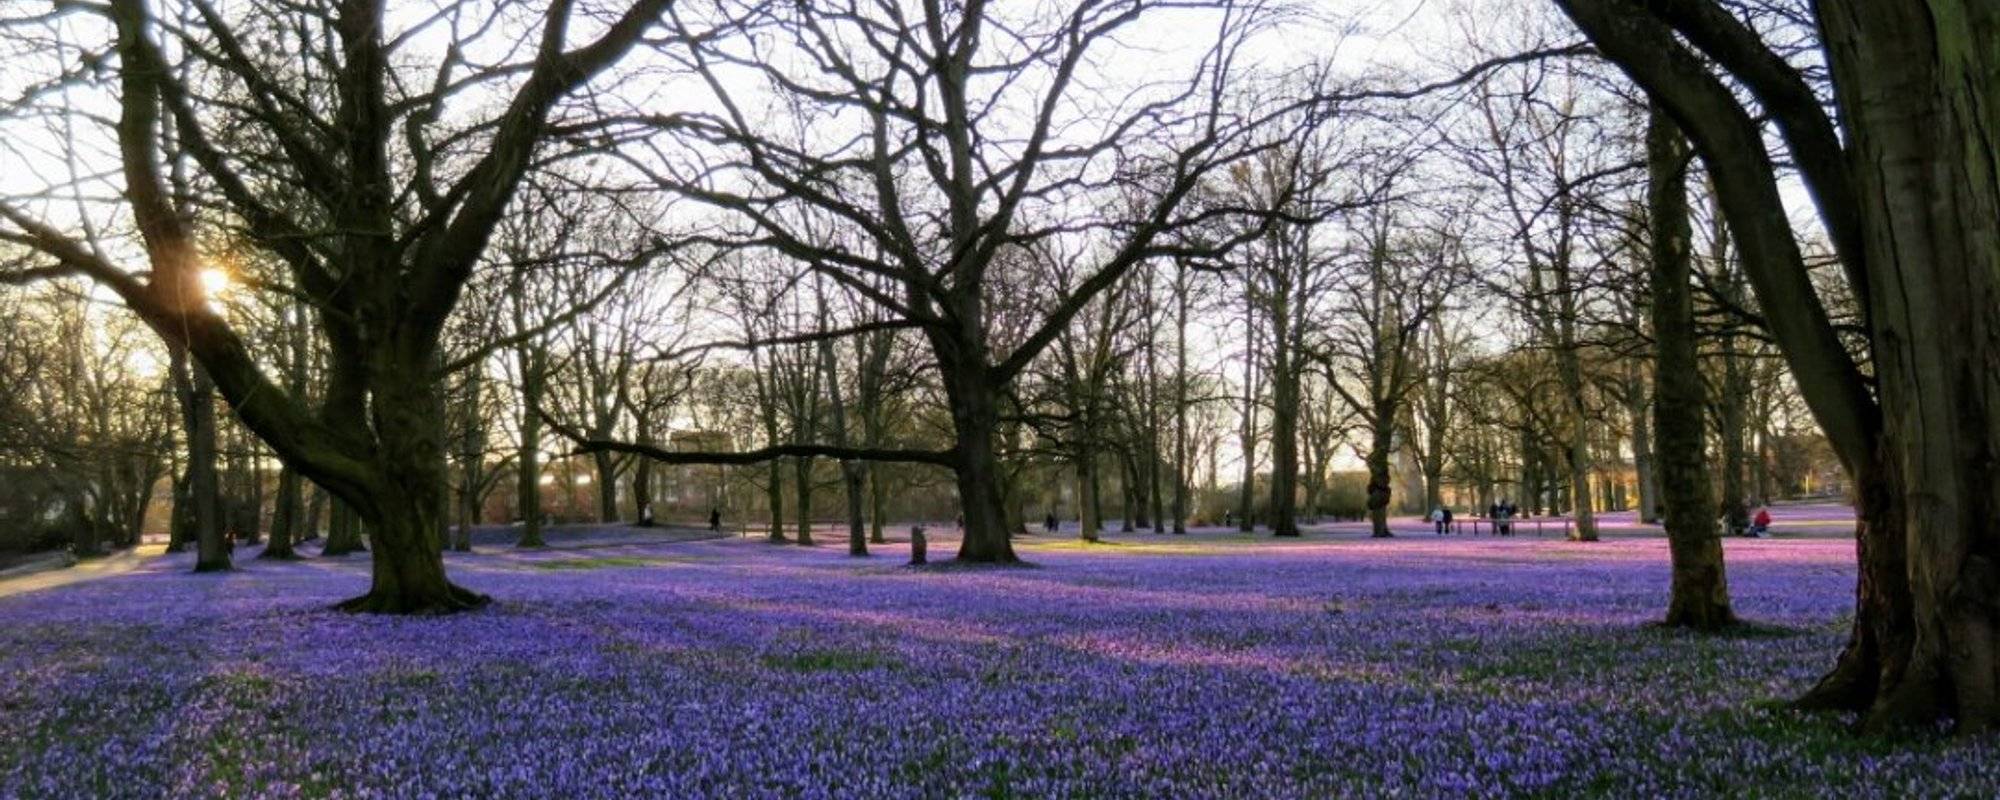 Overlay of Purple Crocus in our City Park